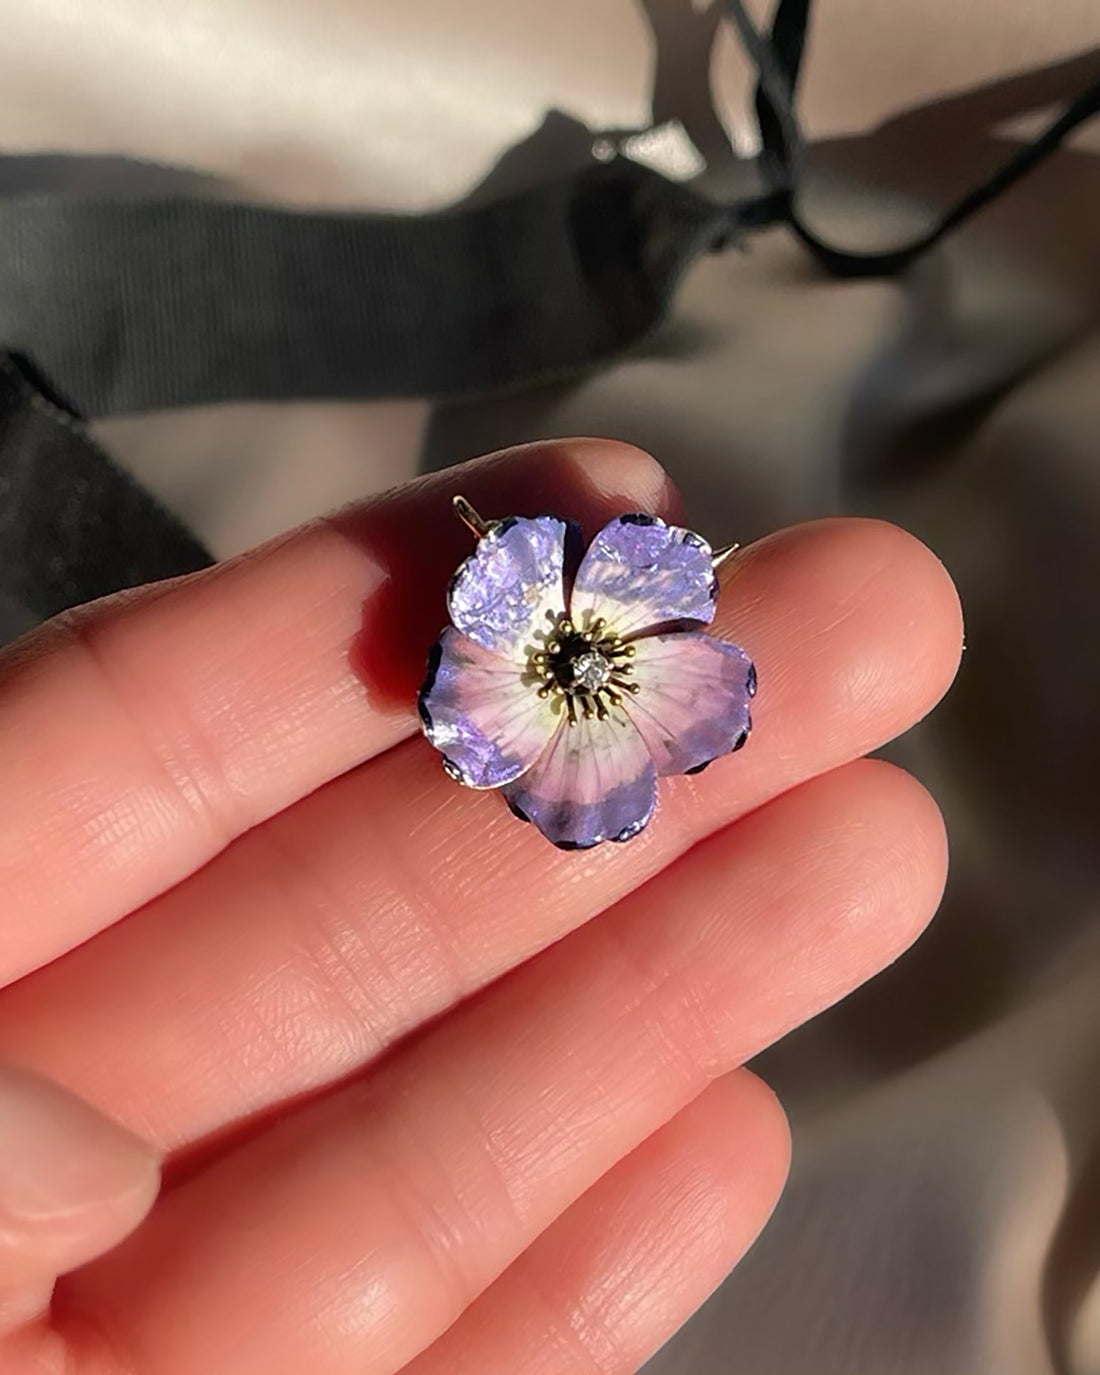 An antique edwardian art nouveau purple, pink, white, and black enamel dogwood flower brooch and pendant with an Old Mine Cut diamond, shown in hand